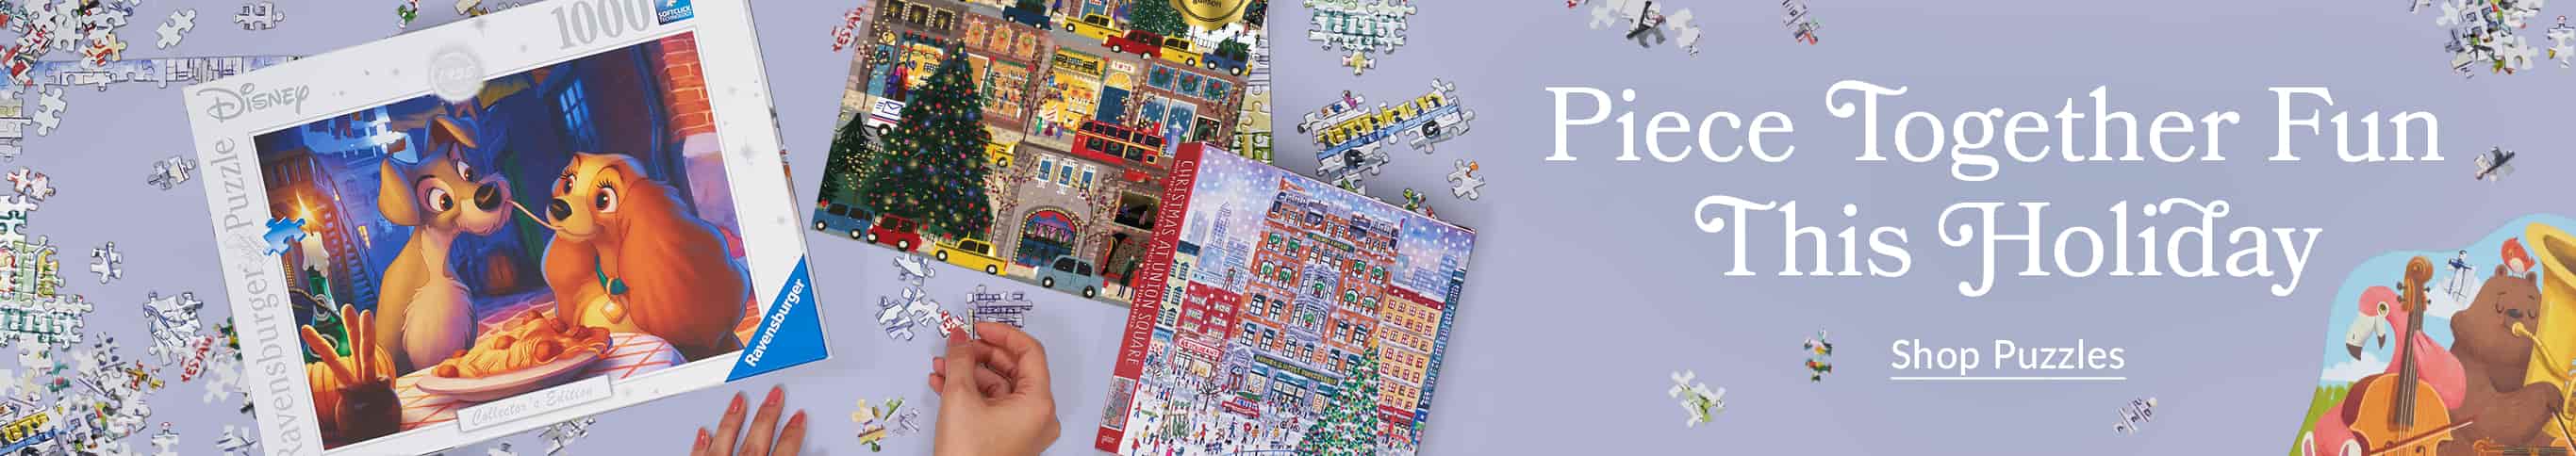 Piece together Fun This Holiday, Shop Puzzles